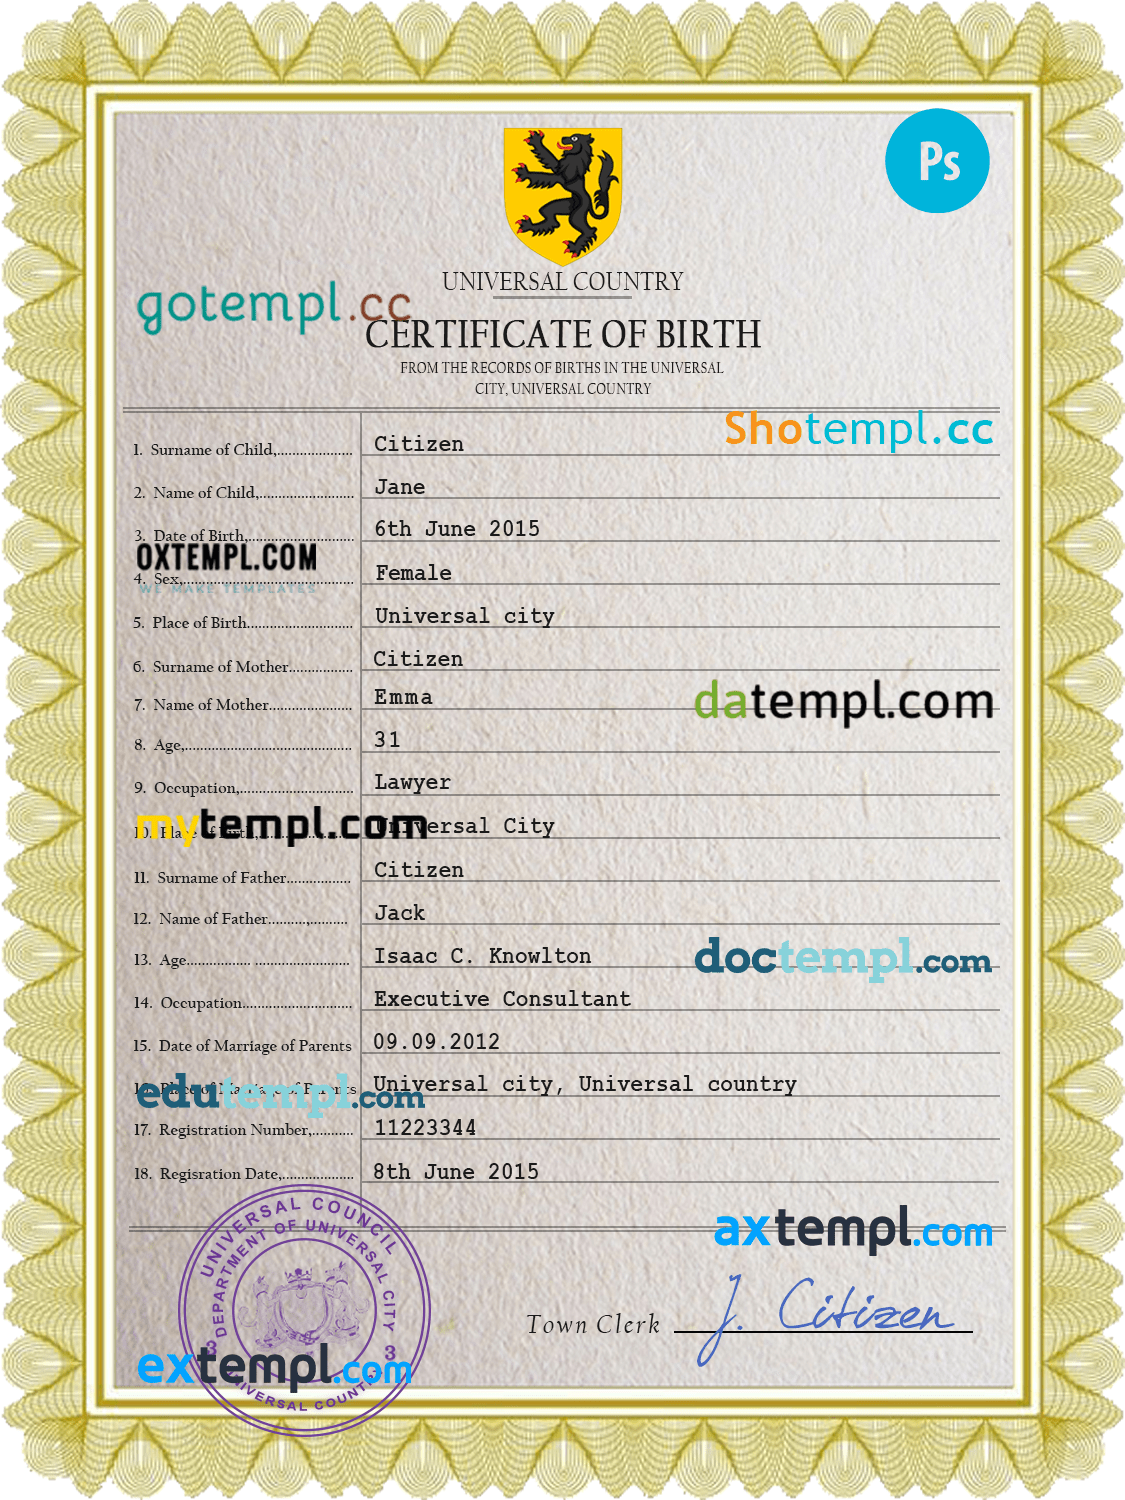 # praise universal birth certificate PSD template, completely editable